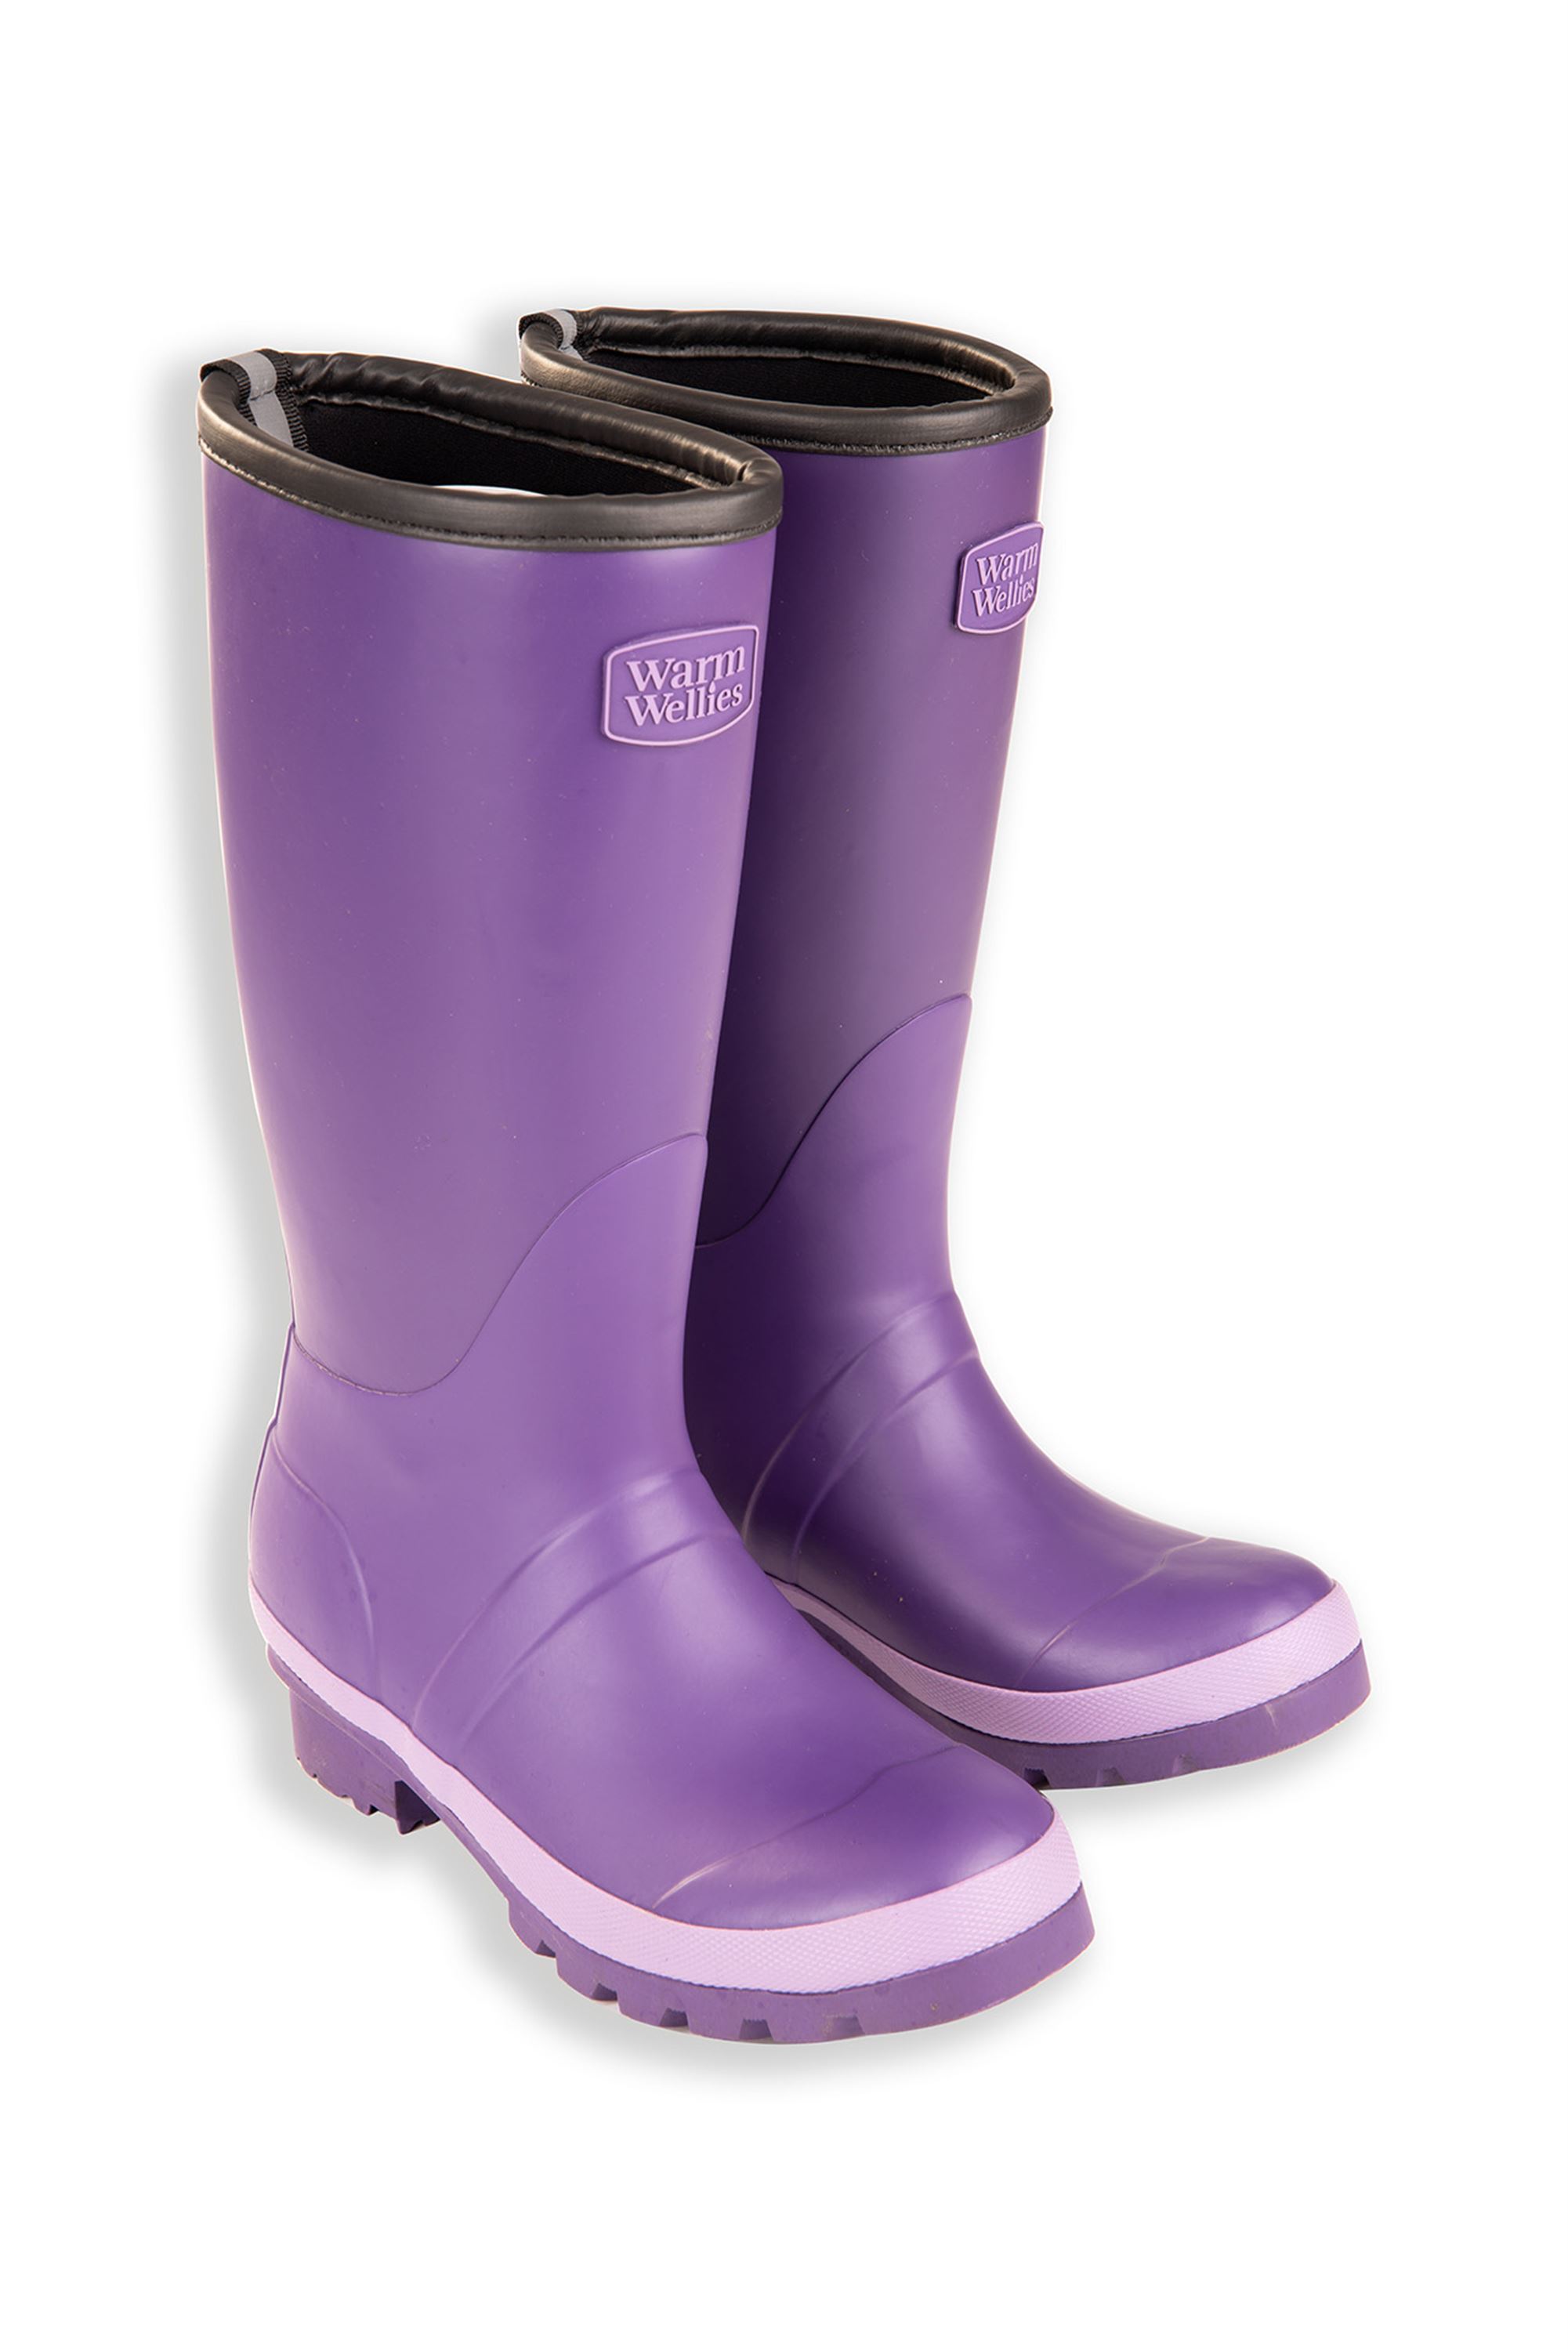 infant size 3 wellies